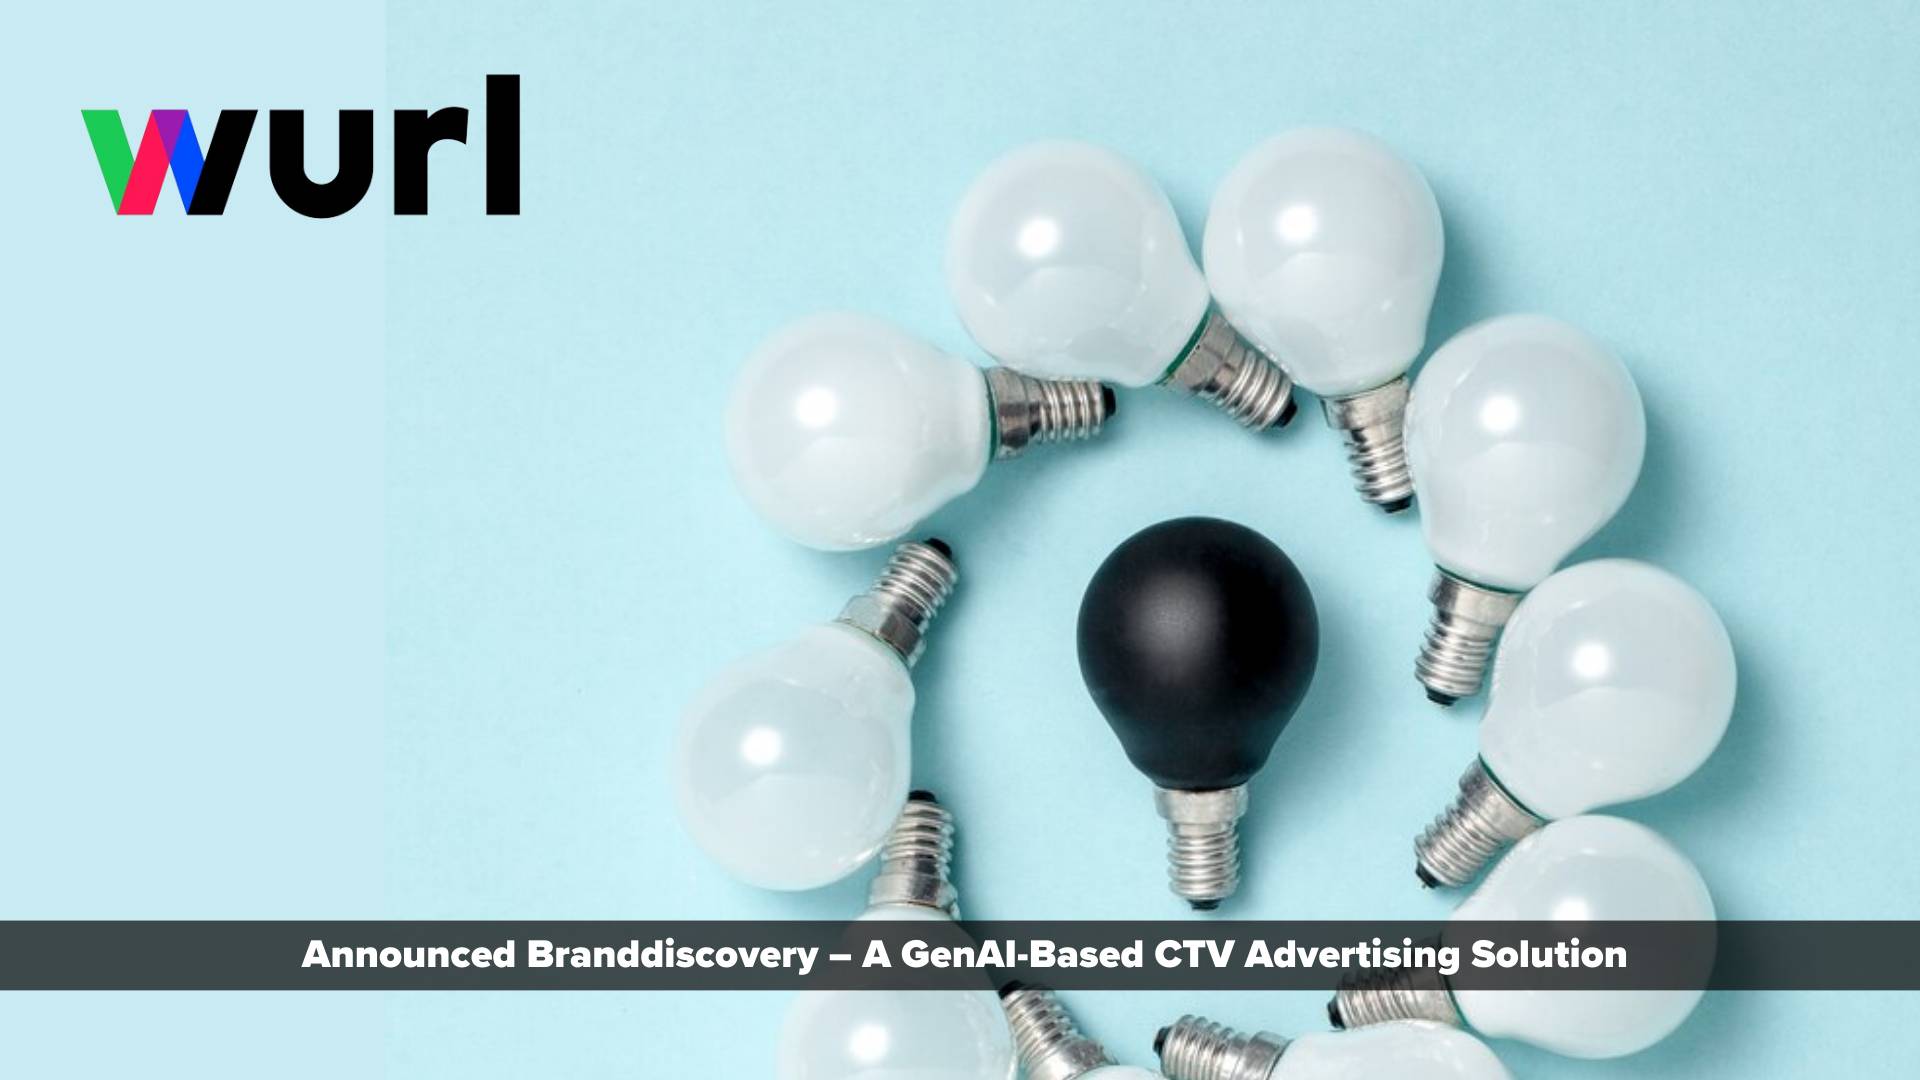 Wurl Launches BrandDiscovery to Precisely Match Connected TV Ads With the Emotion and Context of Programming in Real Time